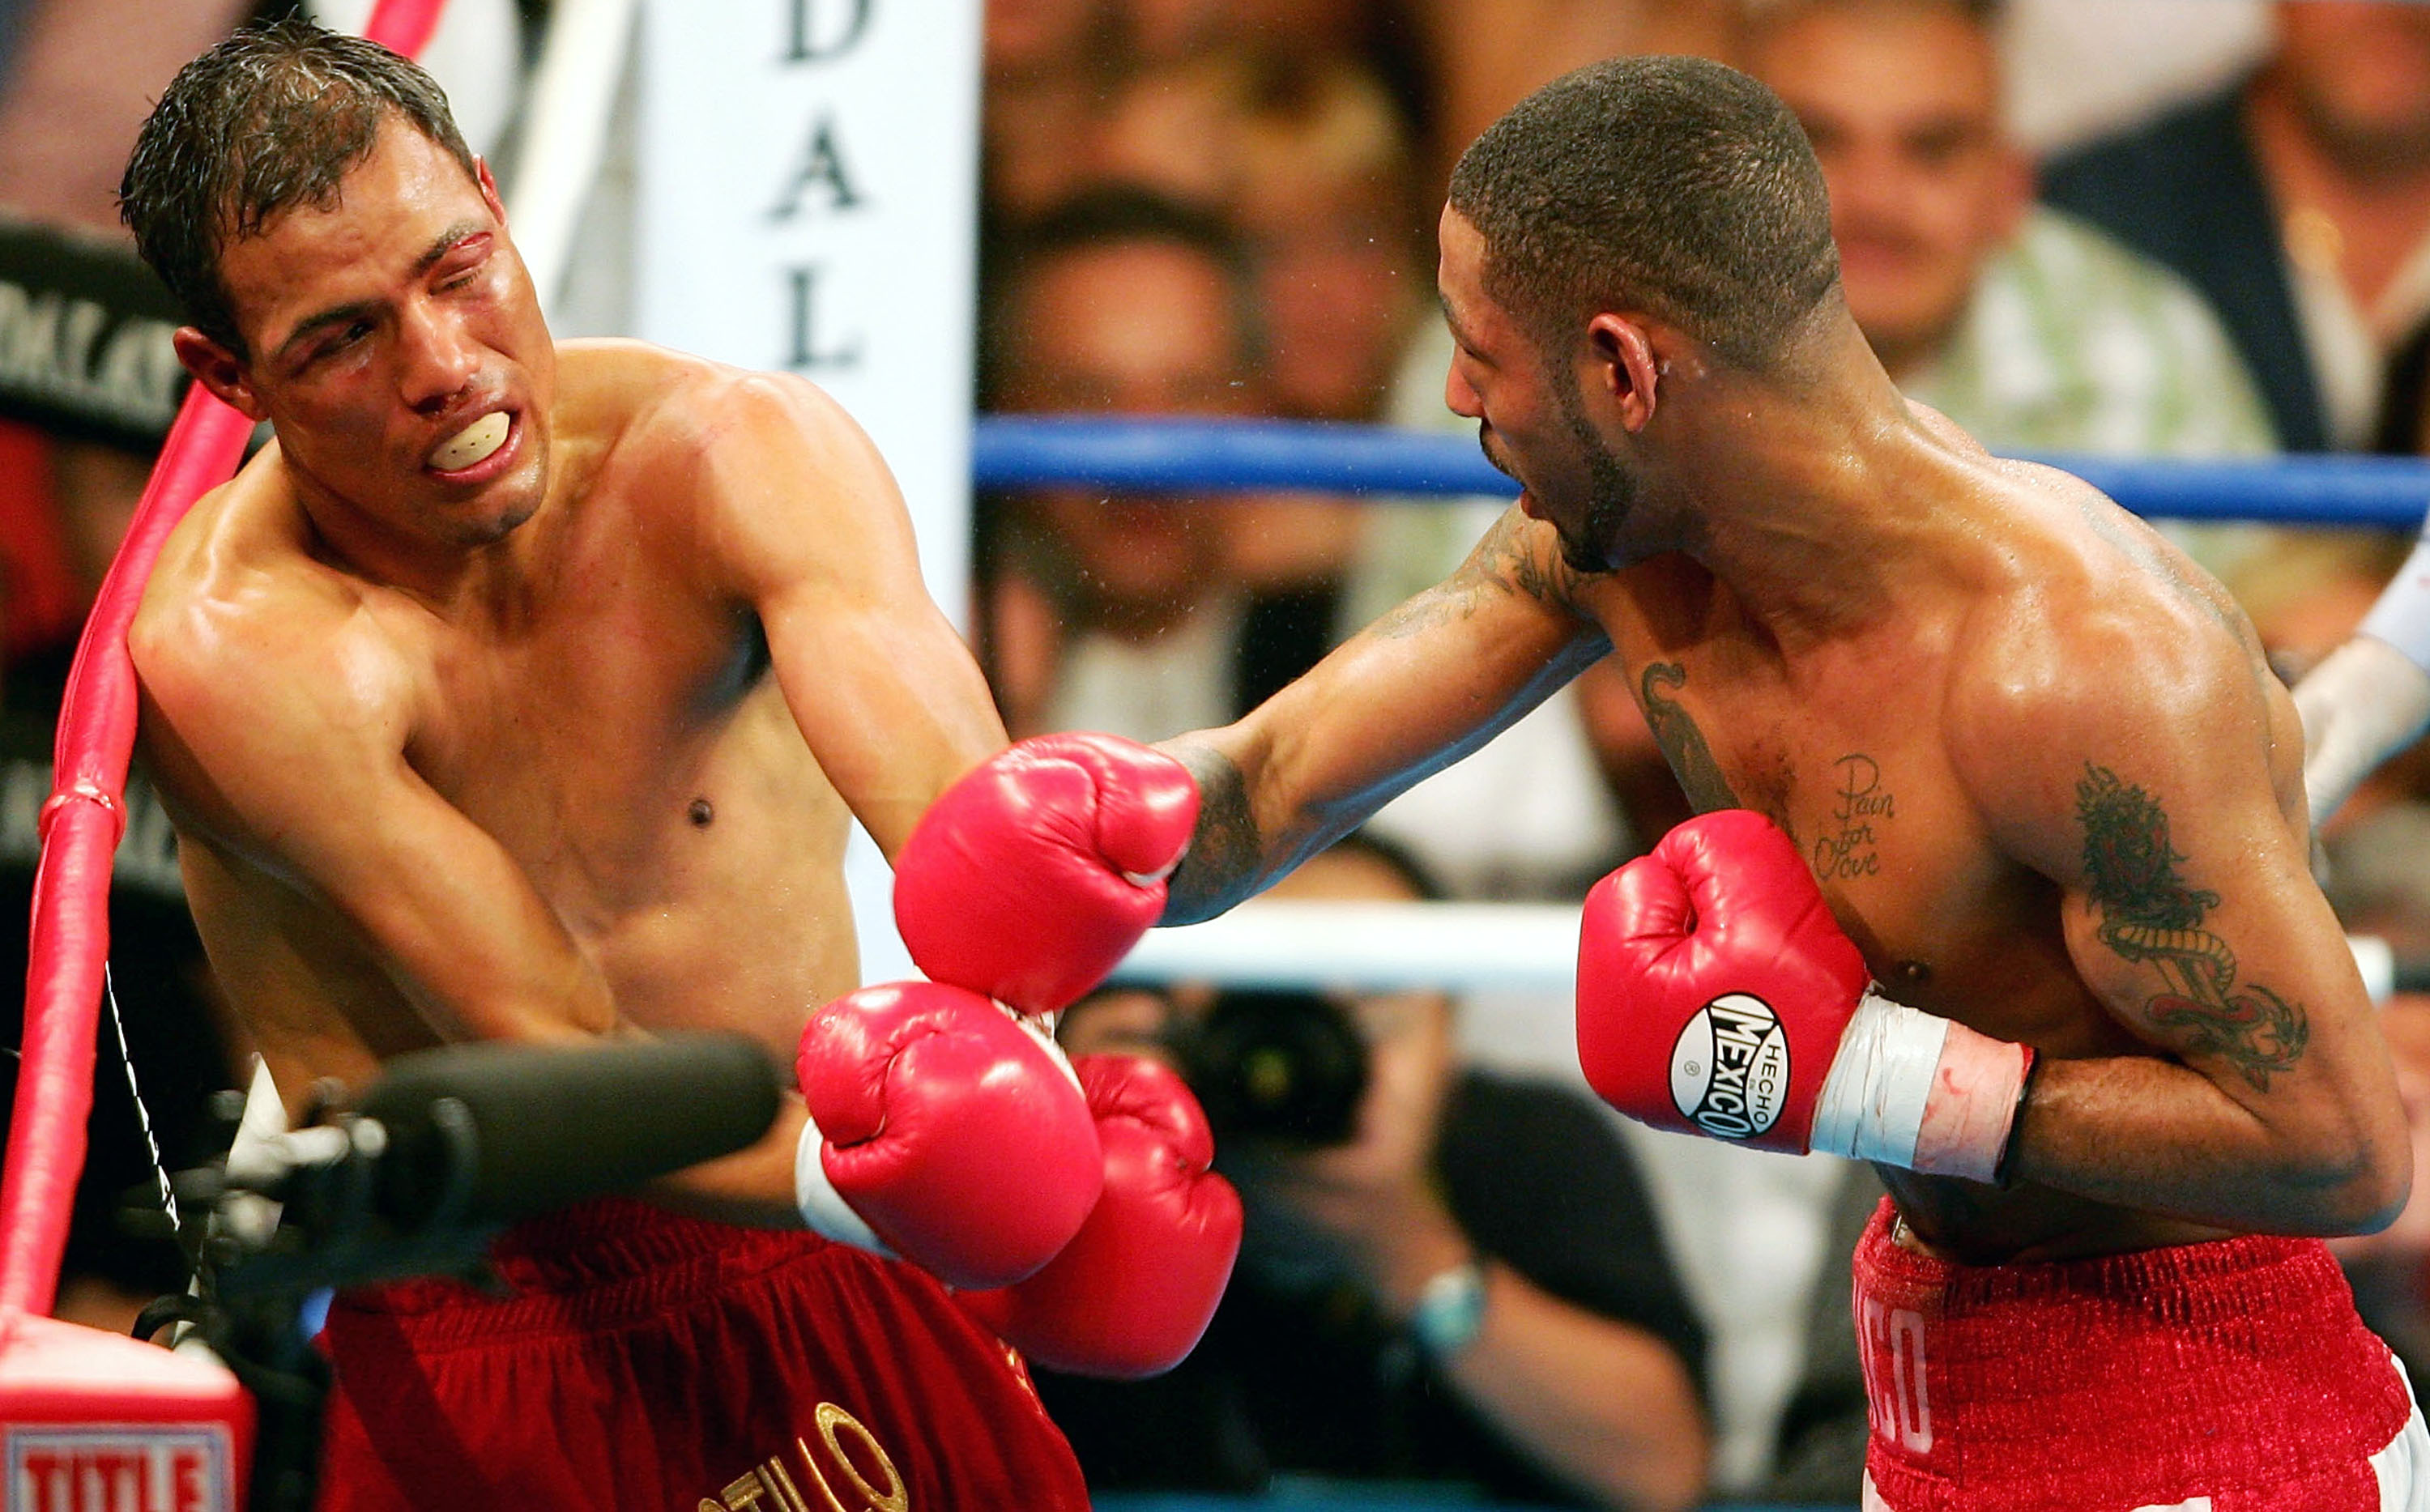 17 years ago today, Diego Corrales and Jose Luis Castillo had a war for the ages